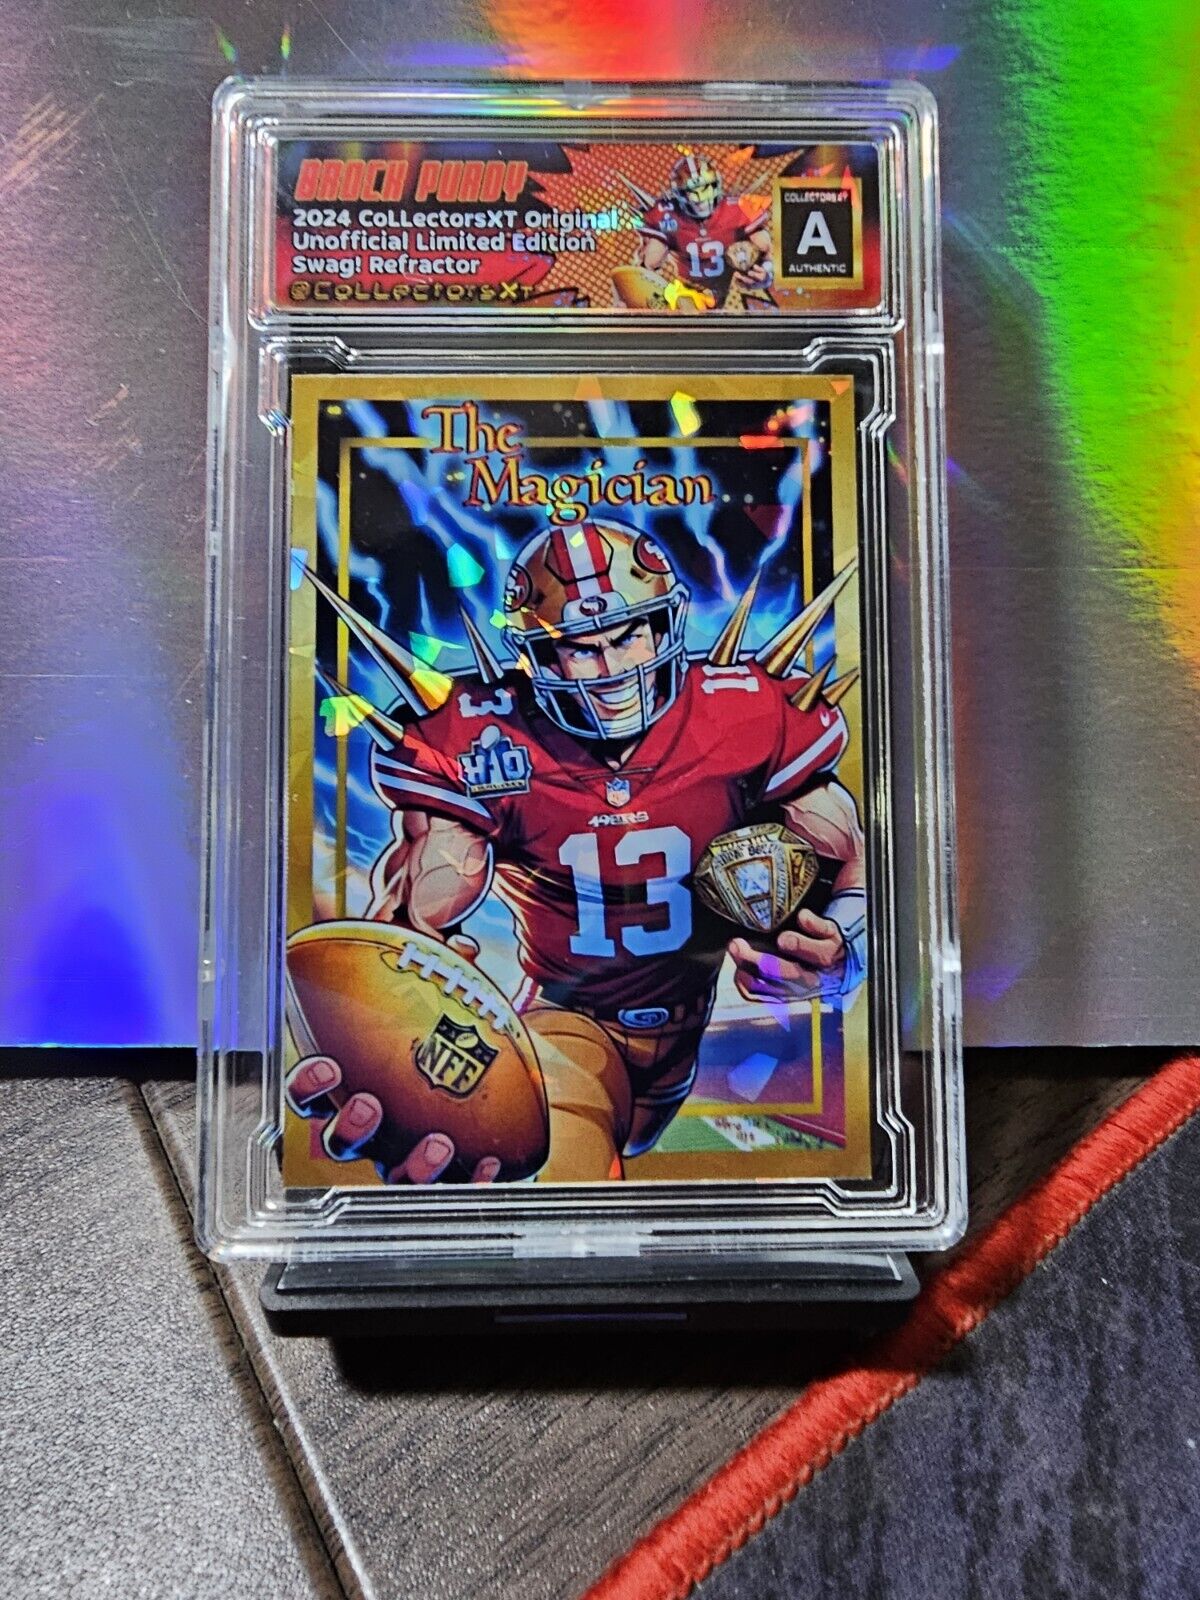 Brock Purdy Gold Cracked Ice Atomic Refractor Limited Edition Custom Card 